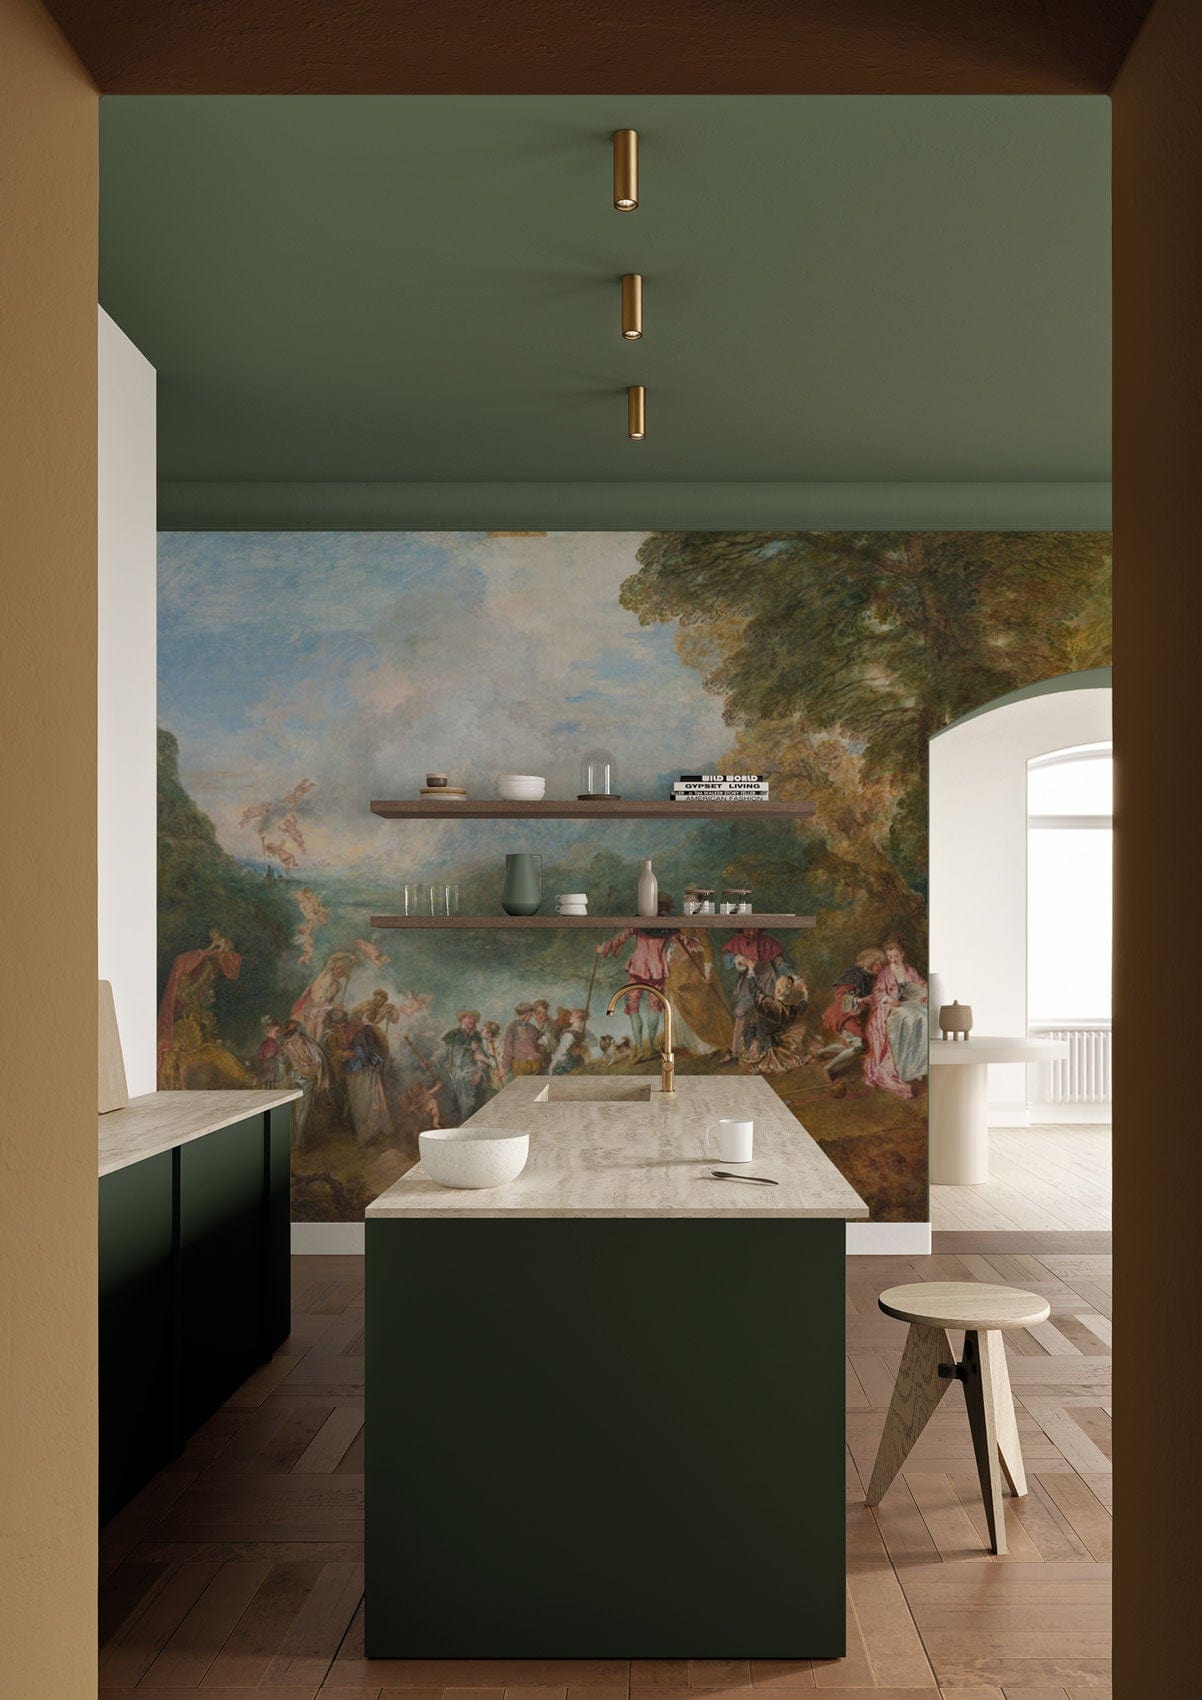 The Embarkation for Cythera Wallpaper Mural for kitchen decor